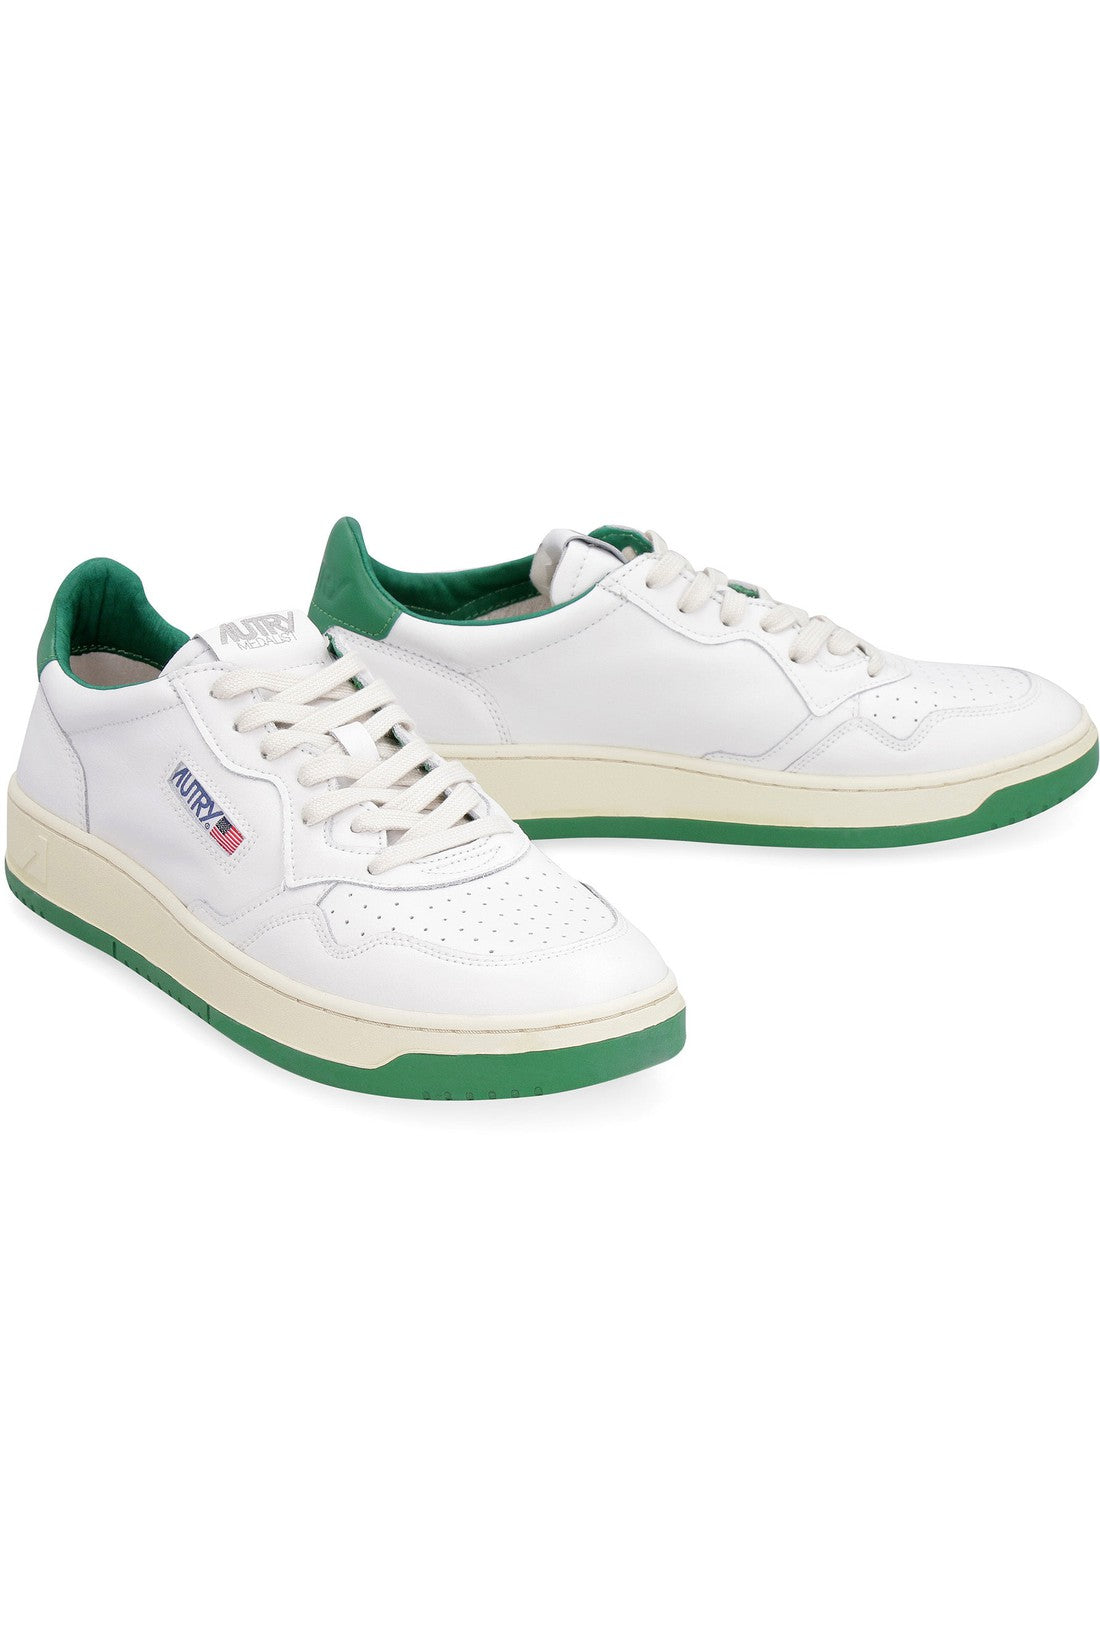 Autry-OUTLET-SALE-Medalist leather low-top sneakers-ARCHIVIST